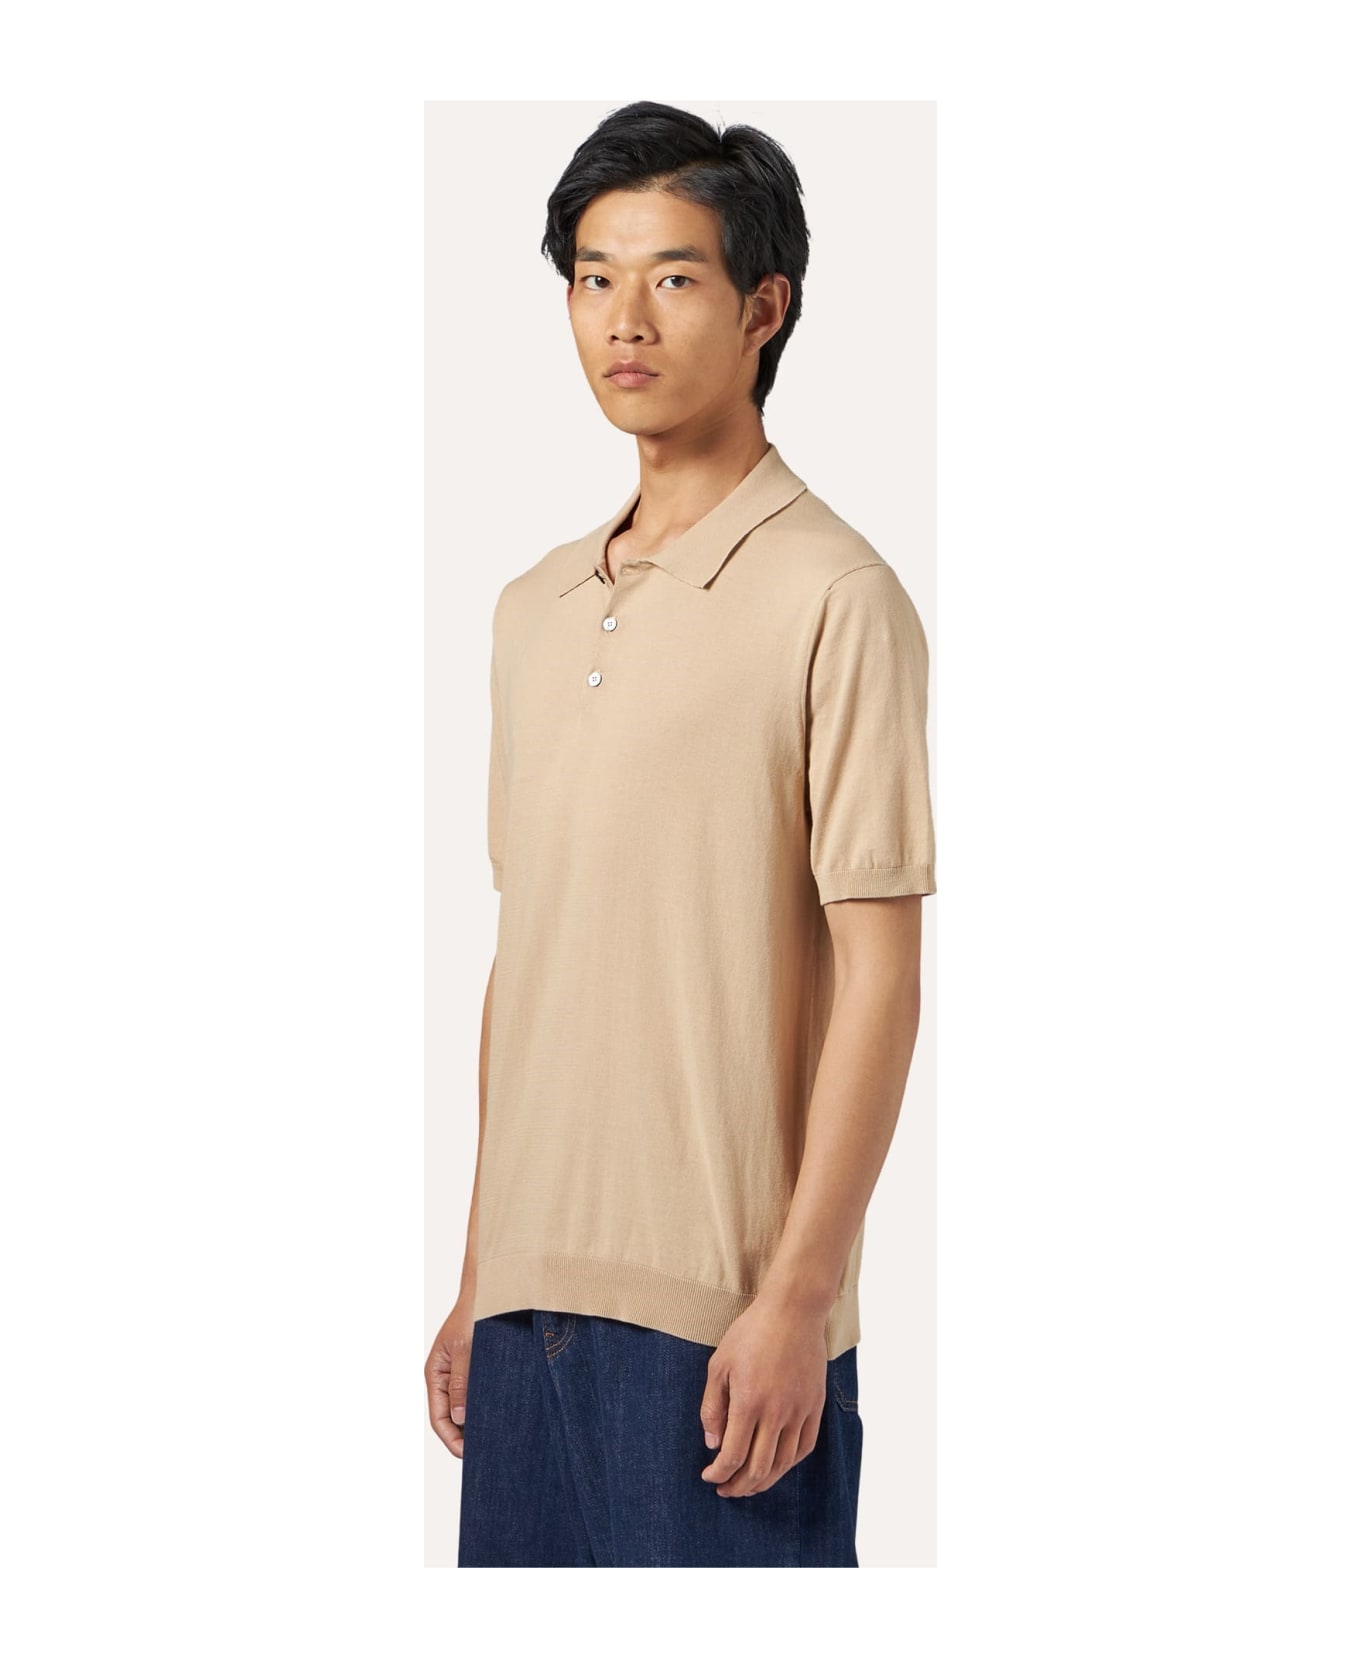 Ballantyne Ultralight Knitted Polo ldigt In Cotton With Buttons - Camel